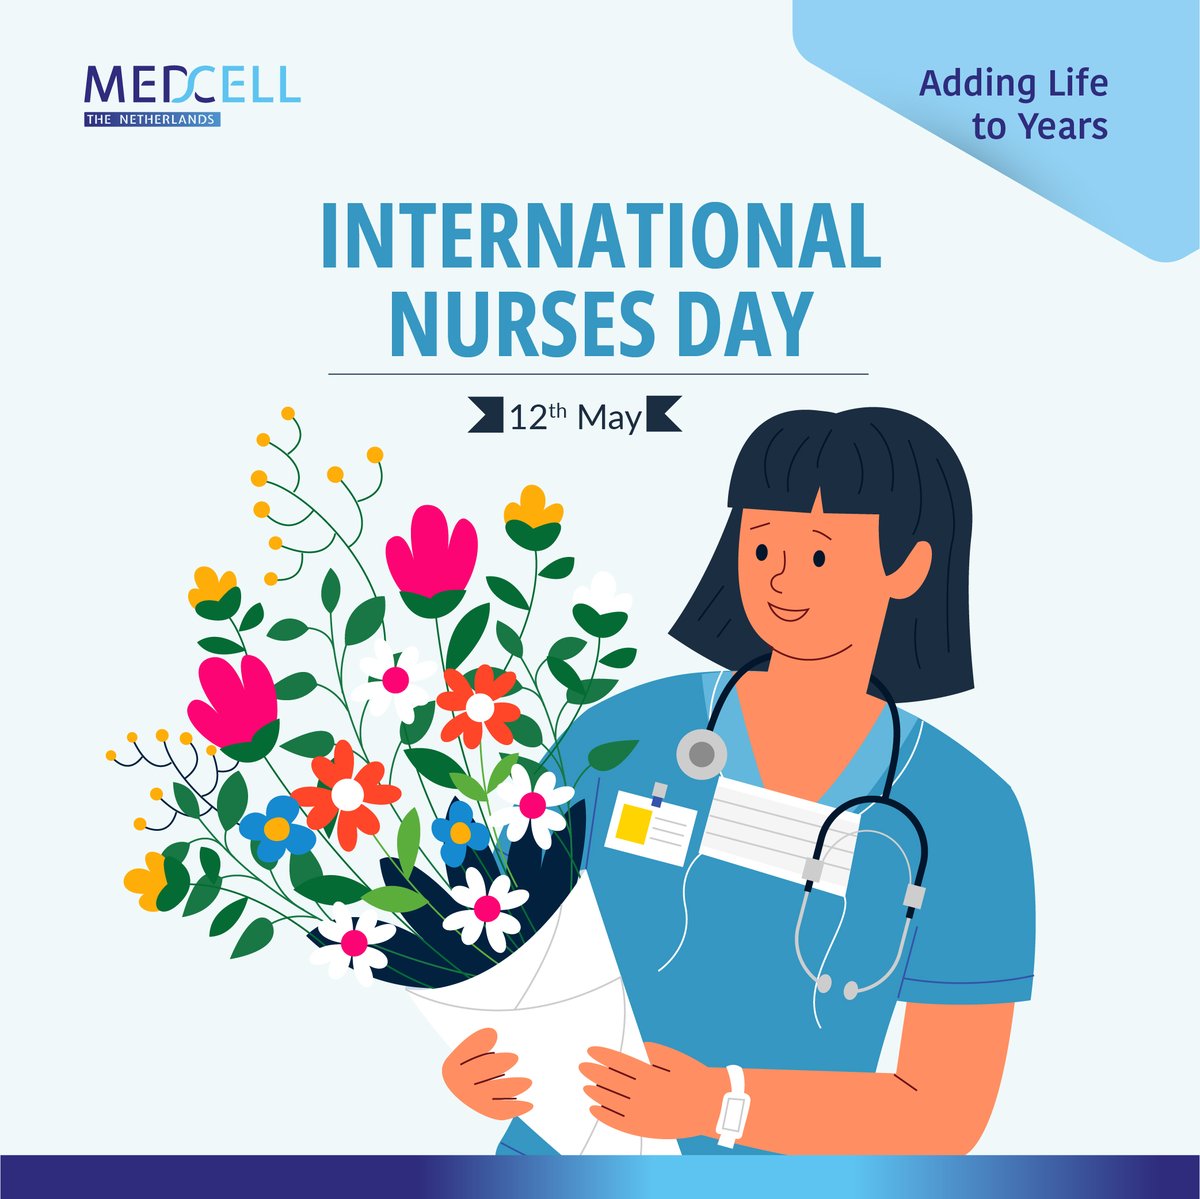 Happy #InternationalNursesDay! ❤️ Thank you for your tireless efforts in providing exceptional care & making a difference in countless lives. 🙌🏥💙#NurseAppreciation #HealthcareHeroes #NursingCommunity #pharma #gynaecology #orthopedics #ivf #medcellpharma #addinglifetoyears